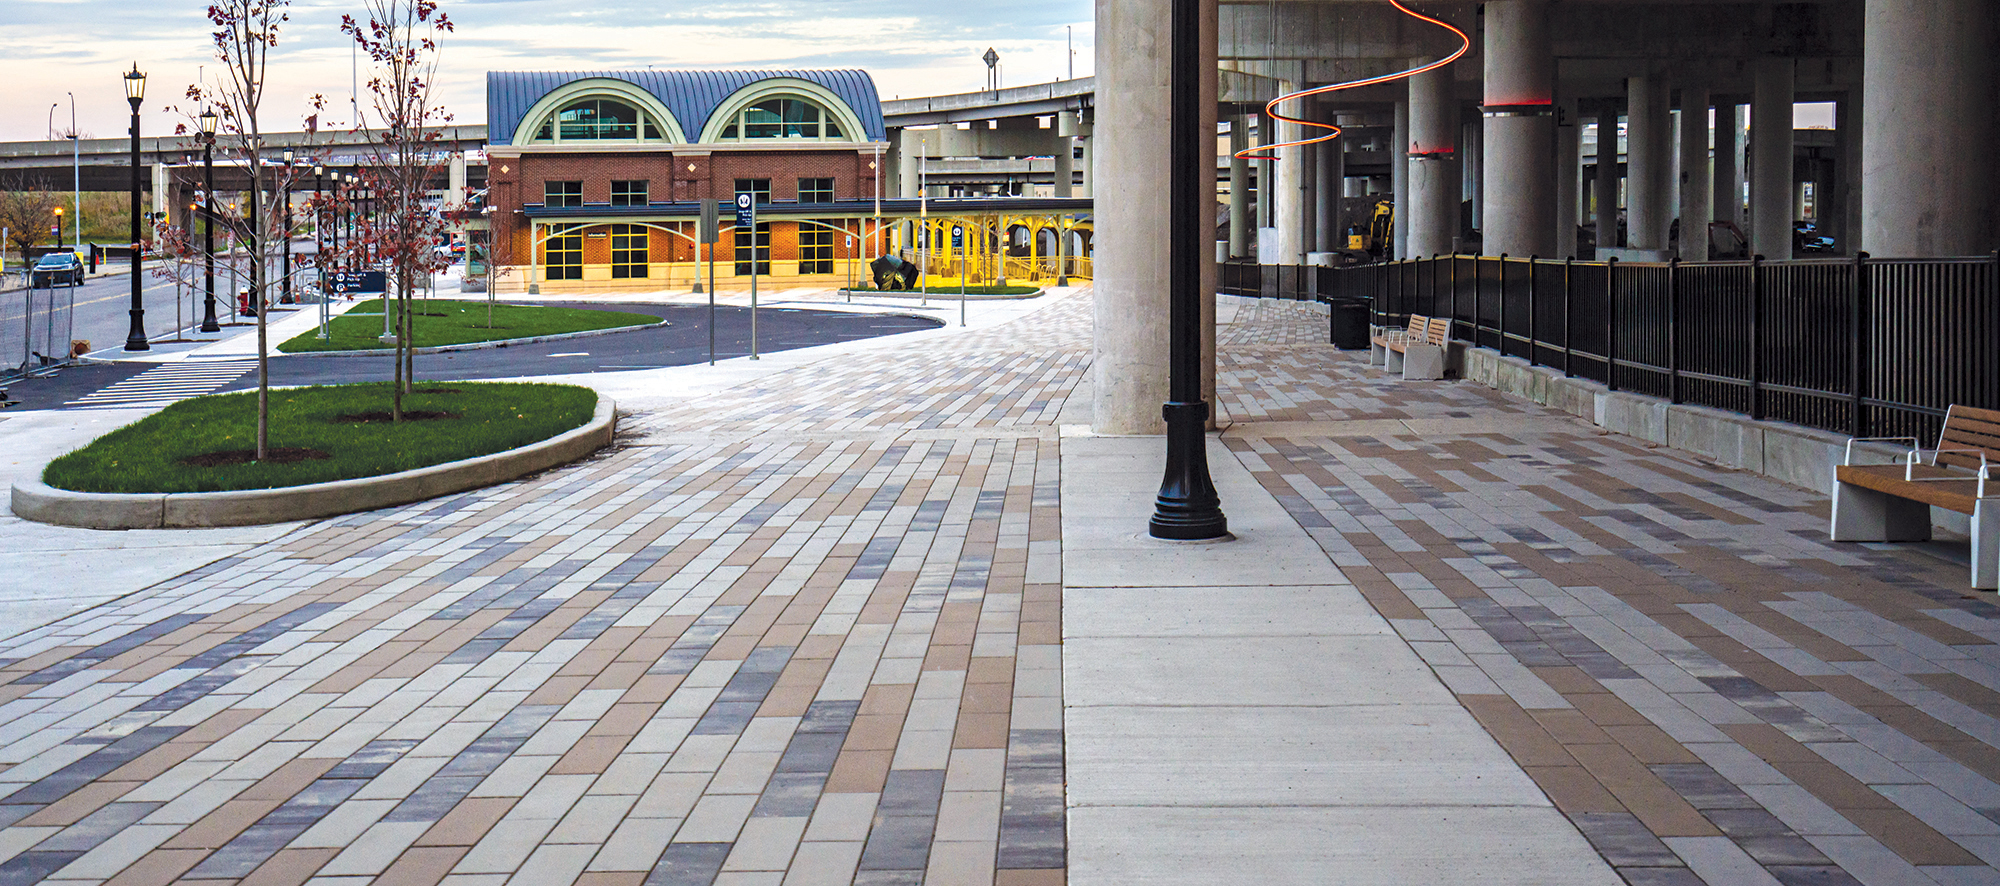 A pedestrian path made of tri-color Promenade Plank pavers, with landscaping and benches, runs alongside loading areas to a train station.